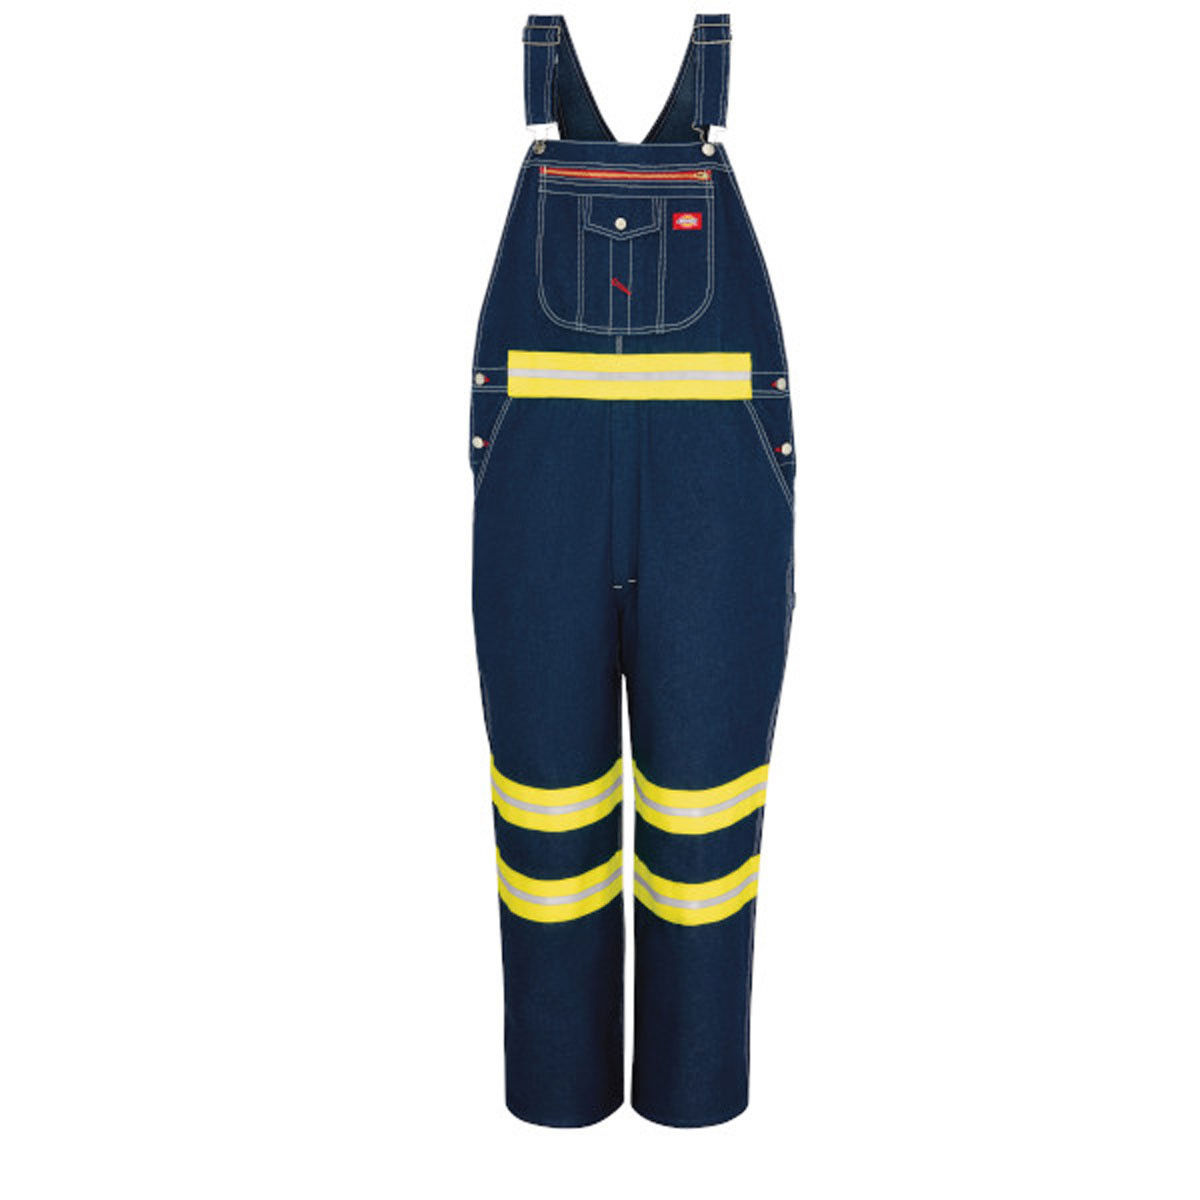 What's the fabric blend of these Dickies bib overalls?